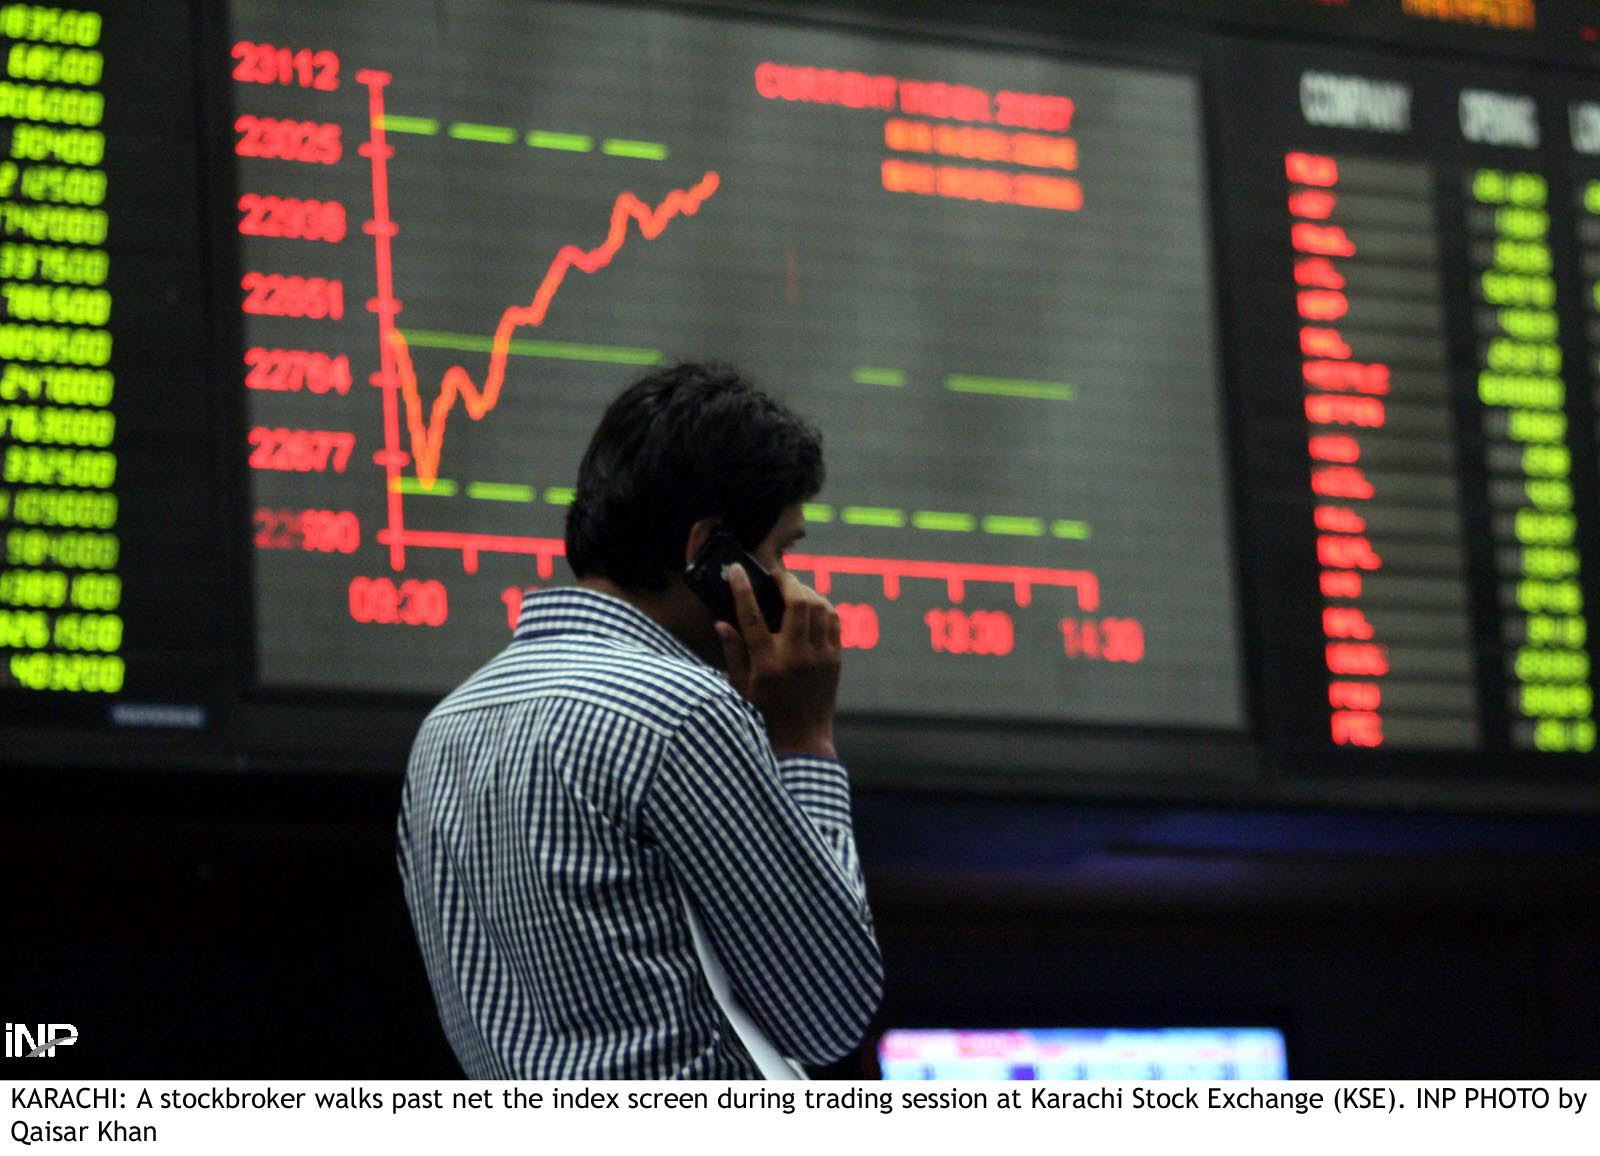 Market watch: Stock market ends in black on last day of trading